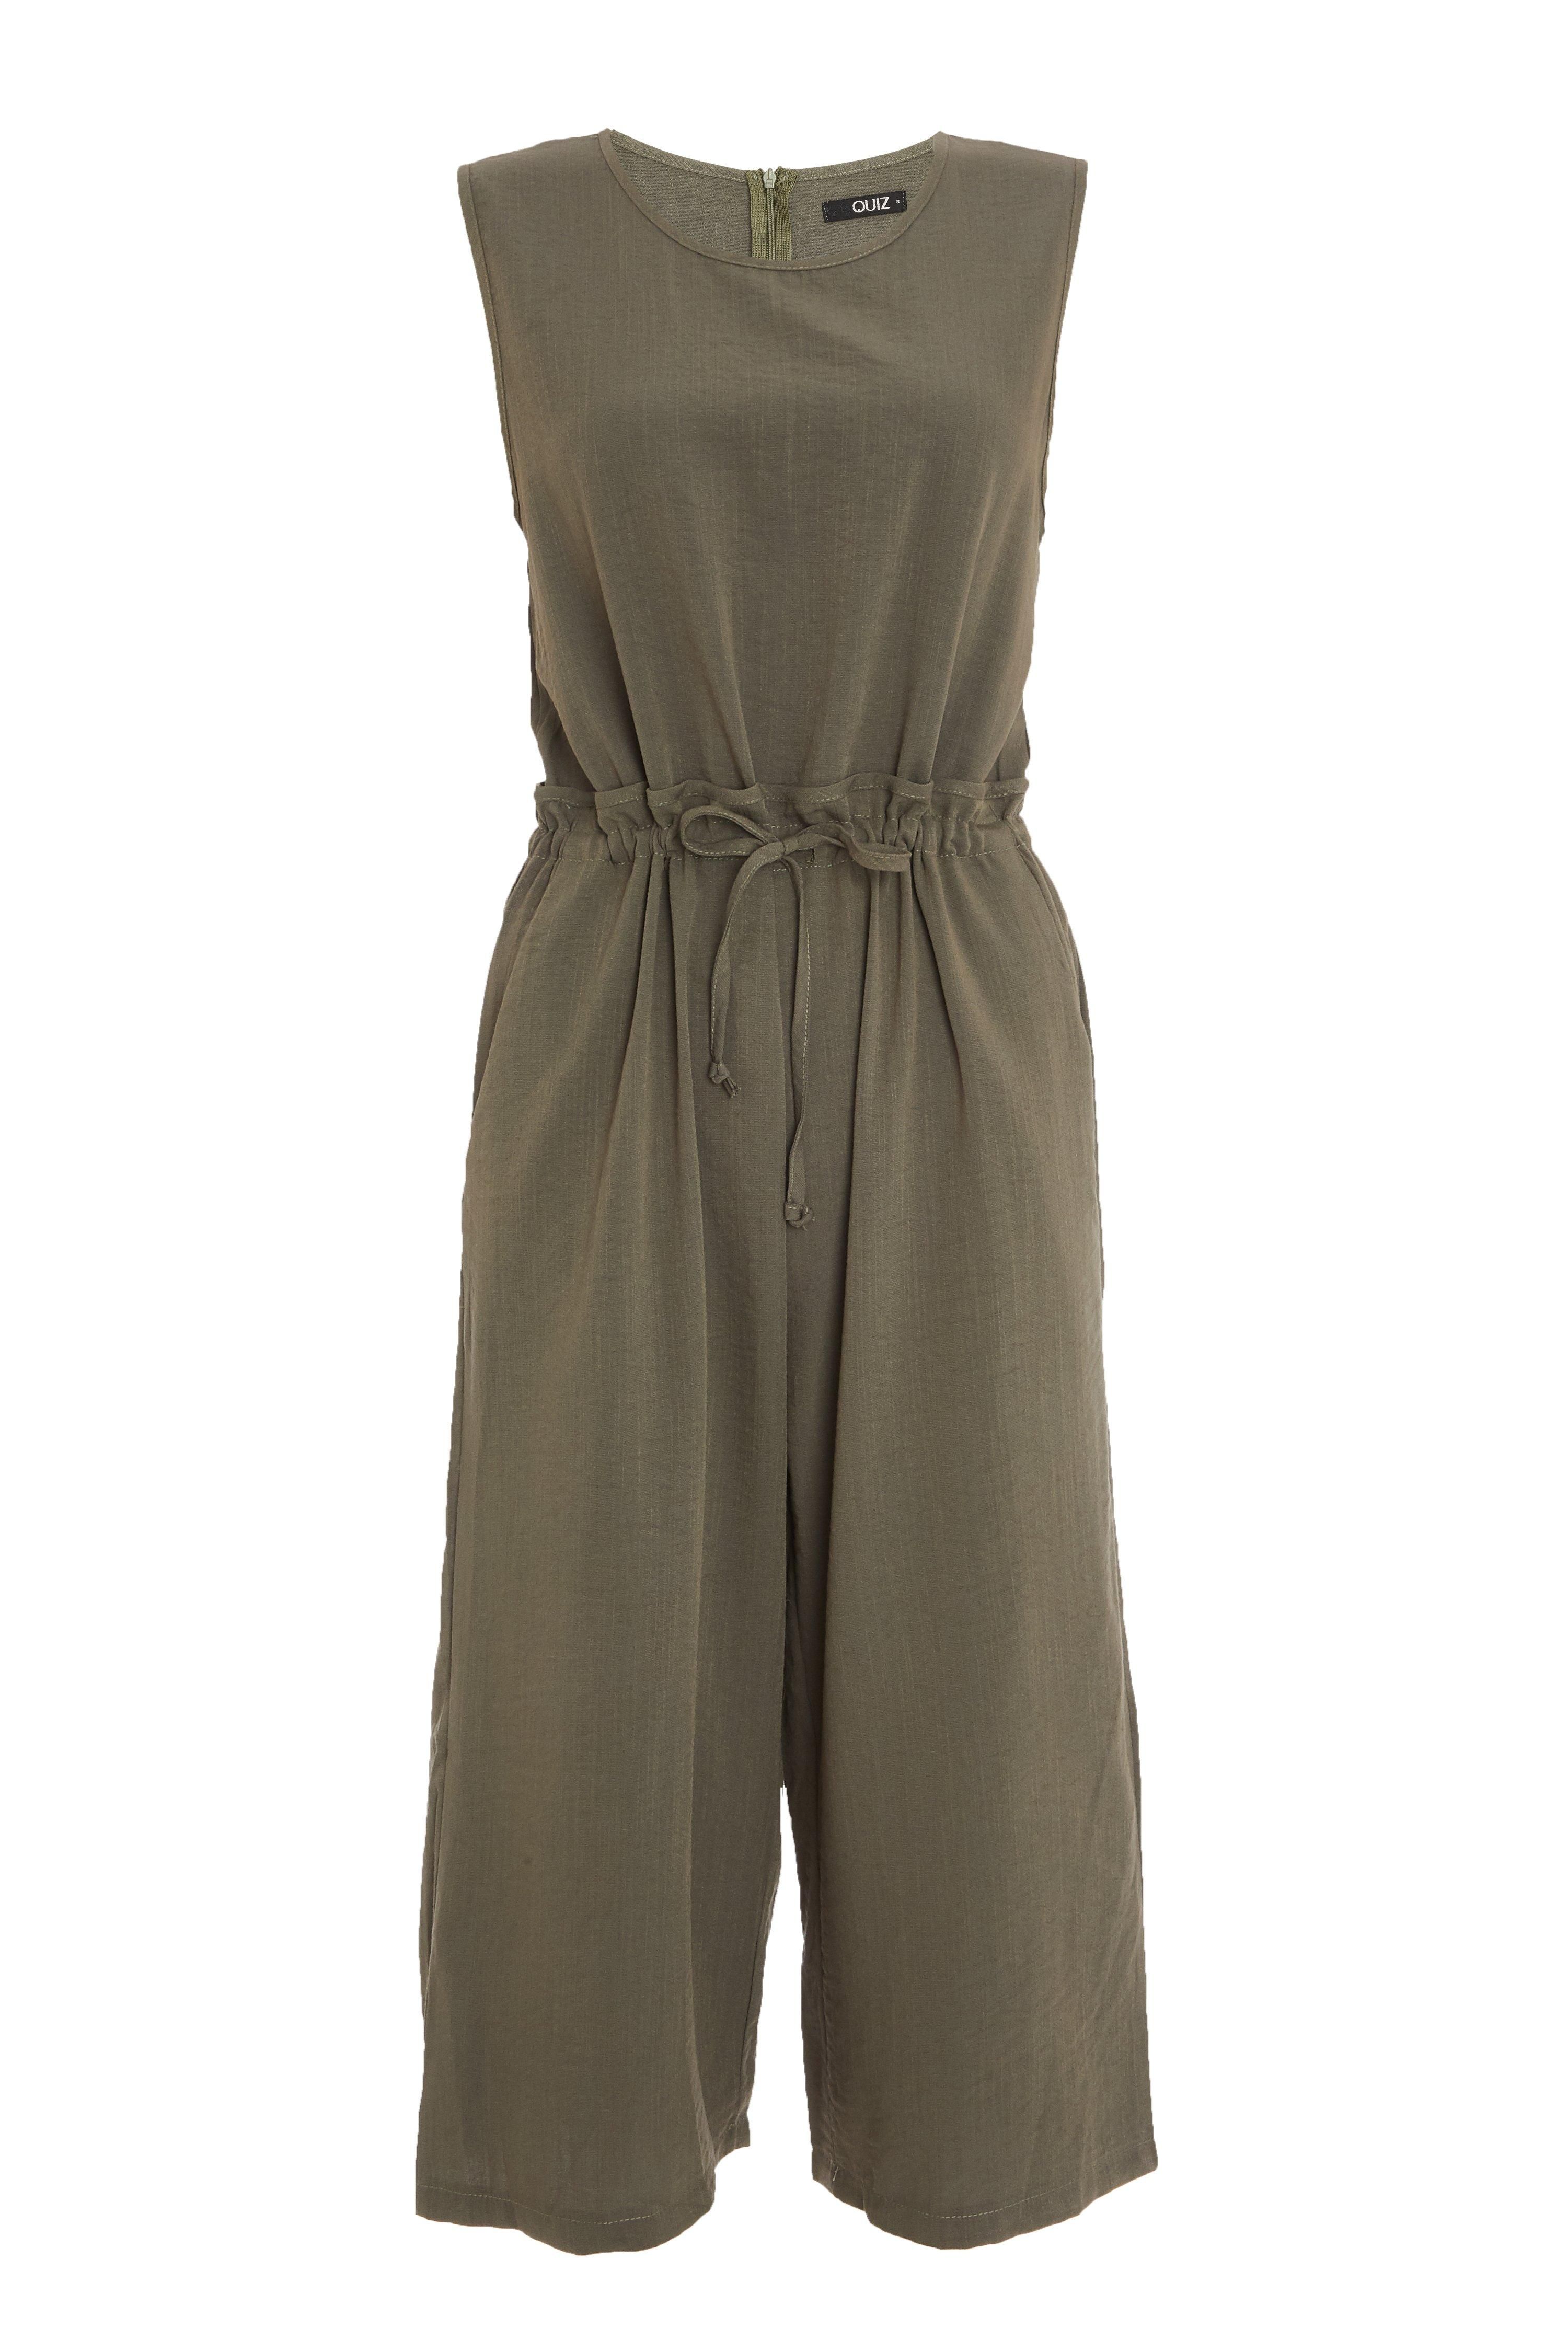 - Sleeveless   - Round neck   - Elasticated waist   - Culotte style   - Length: 113 cm approx  - Model Height: 5' 8